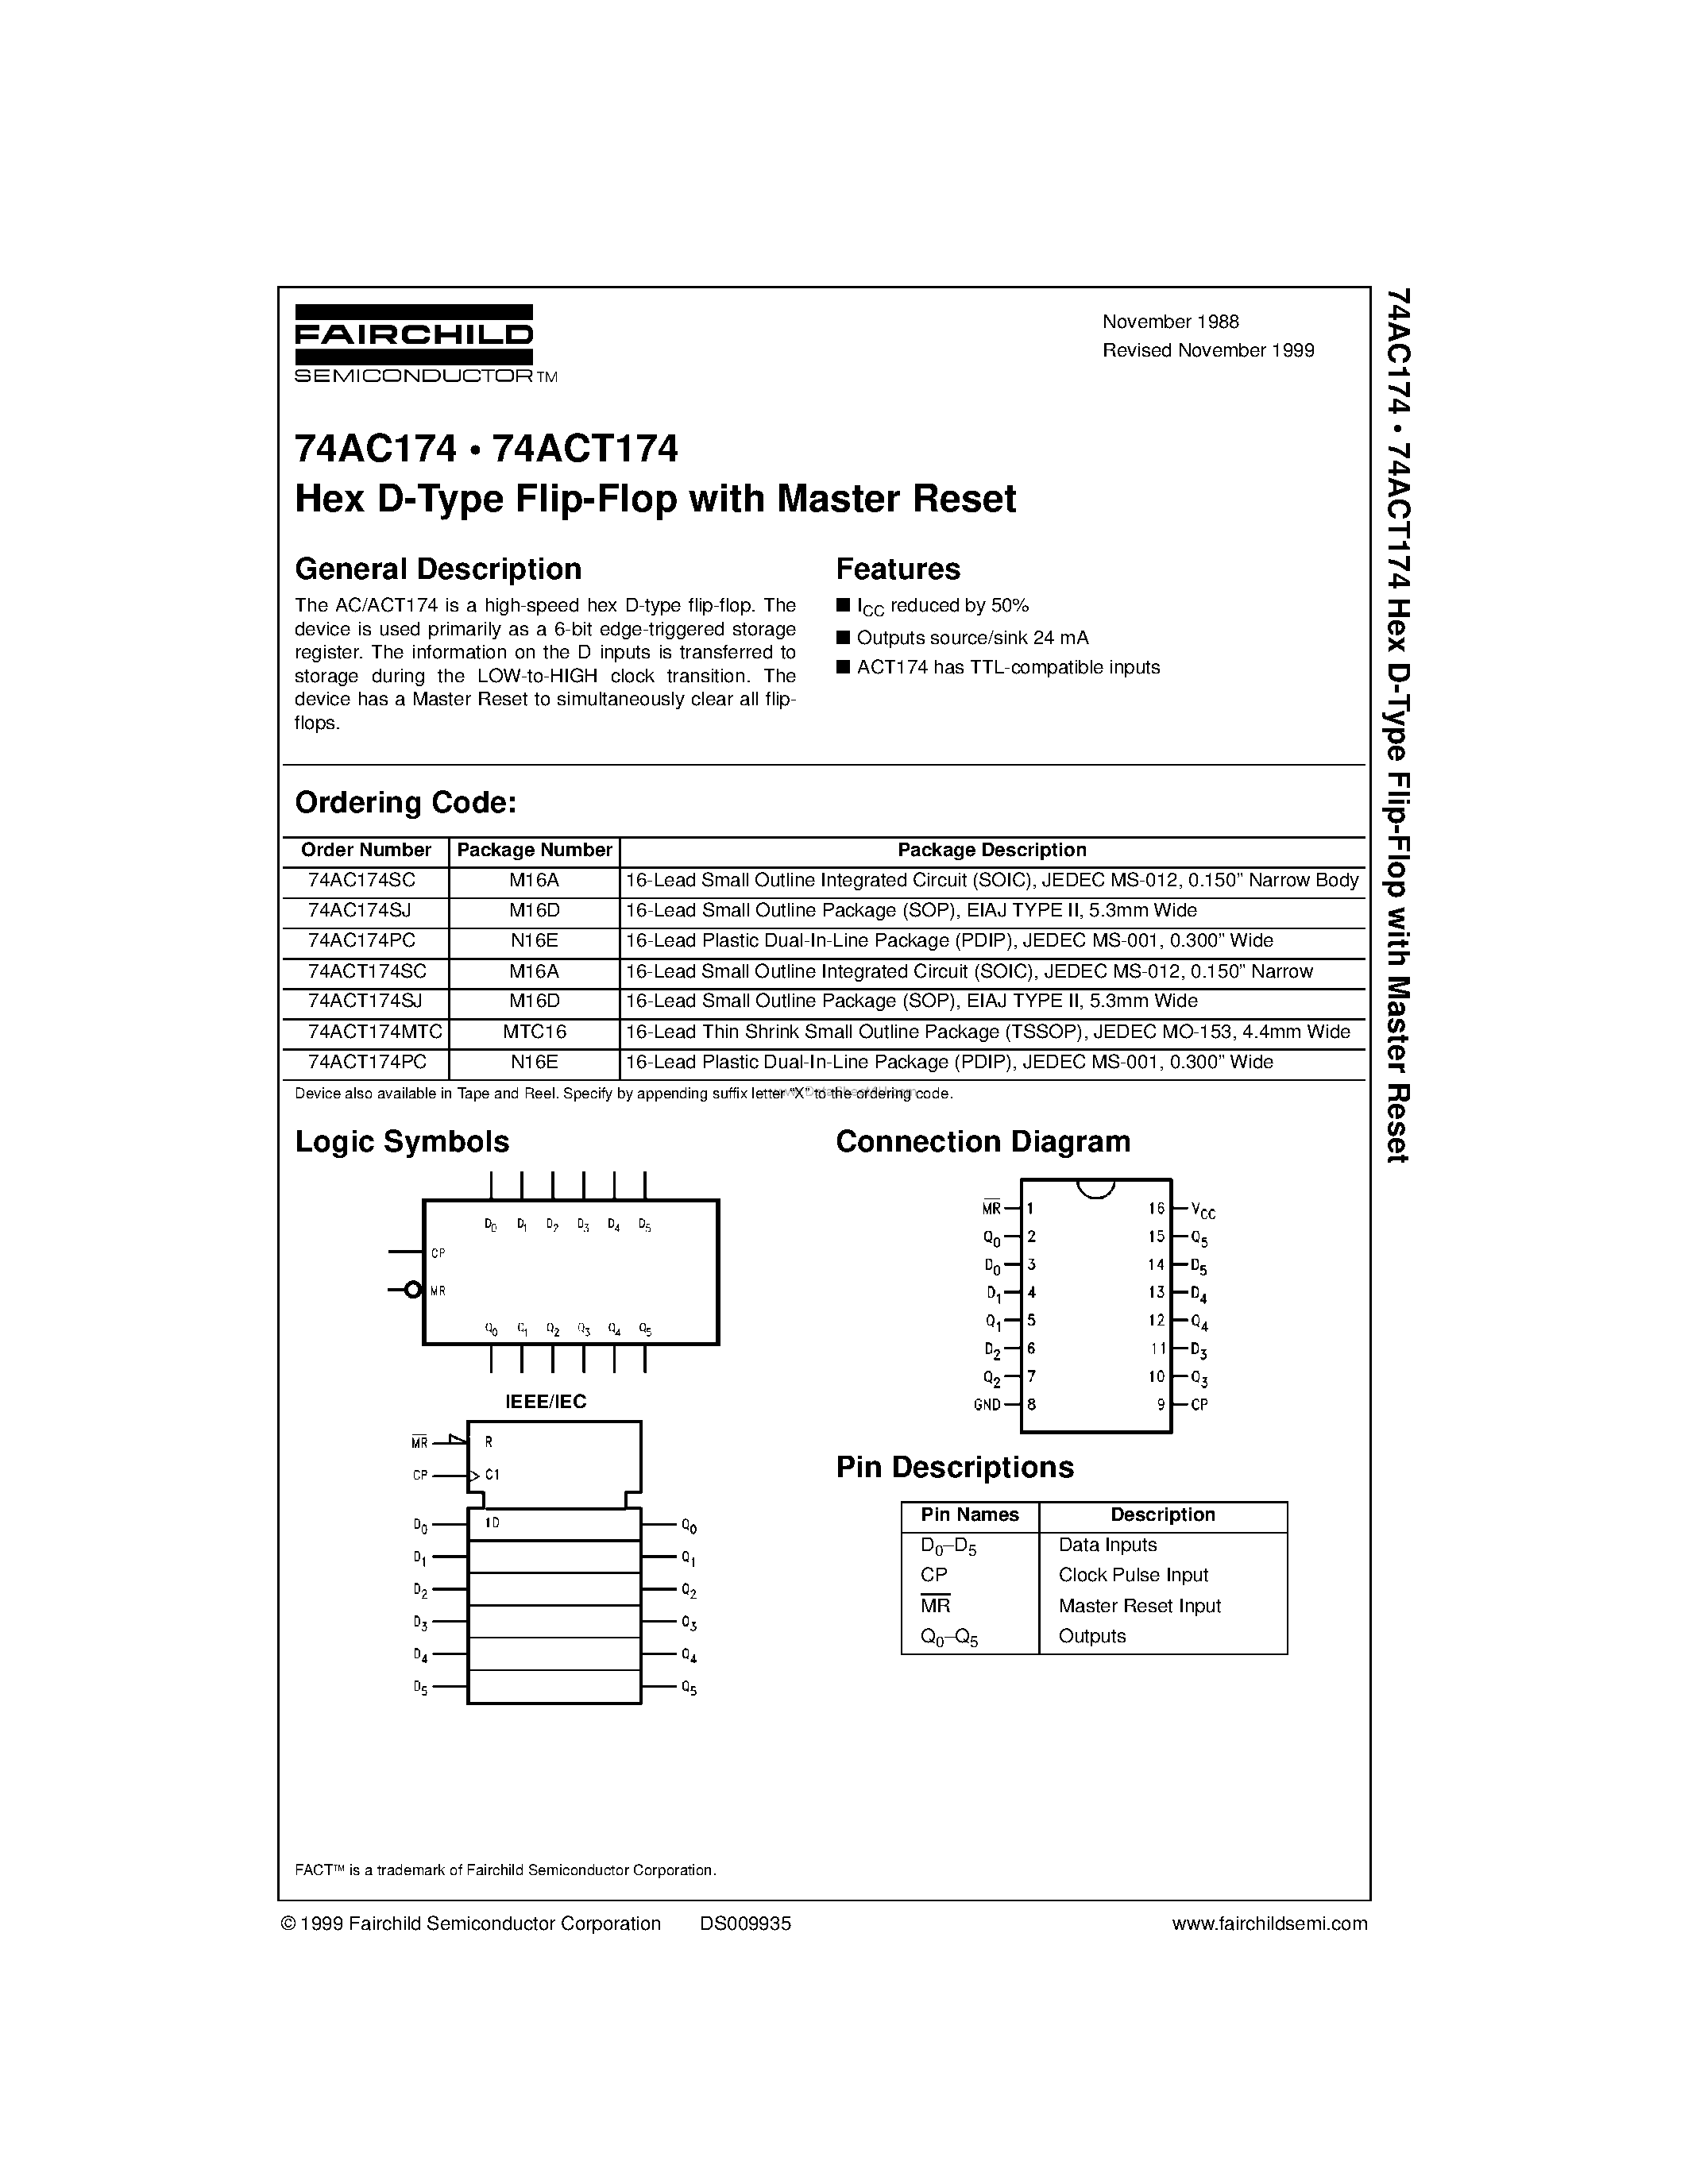 Datasheet 74AC174PC - Hex D-Type Flip-Flop with Master Reset page 1